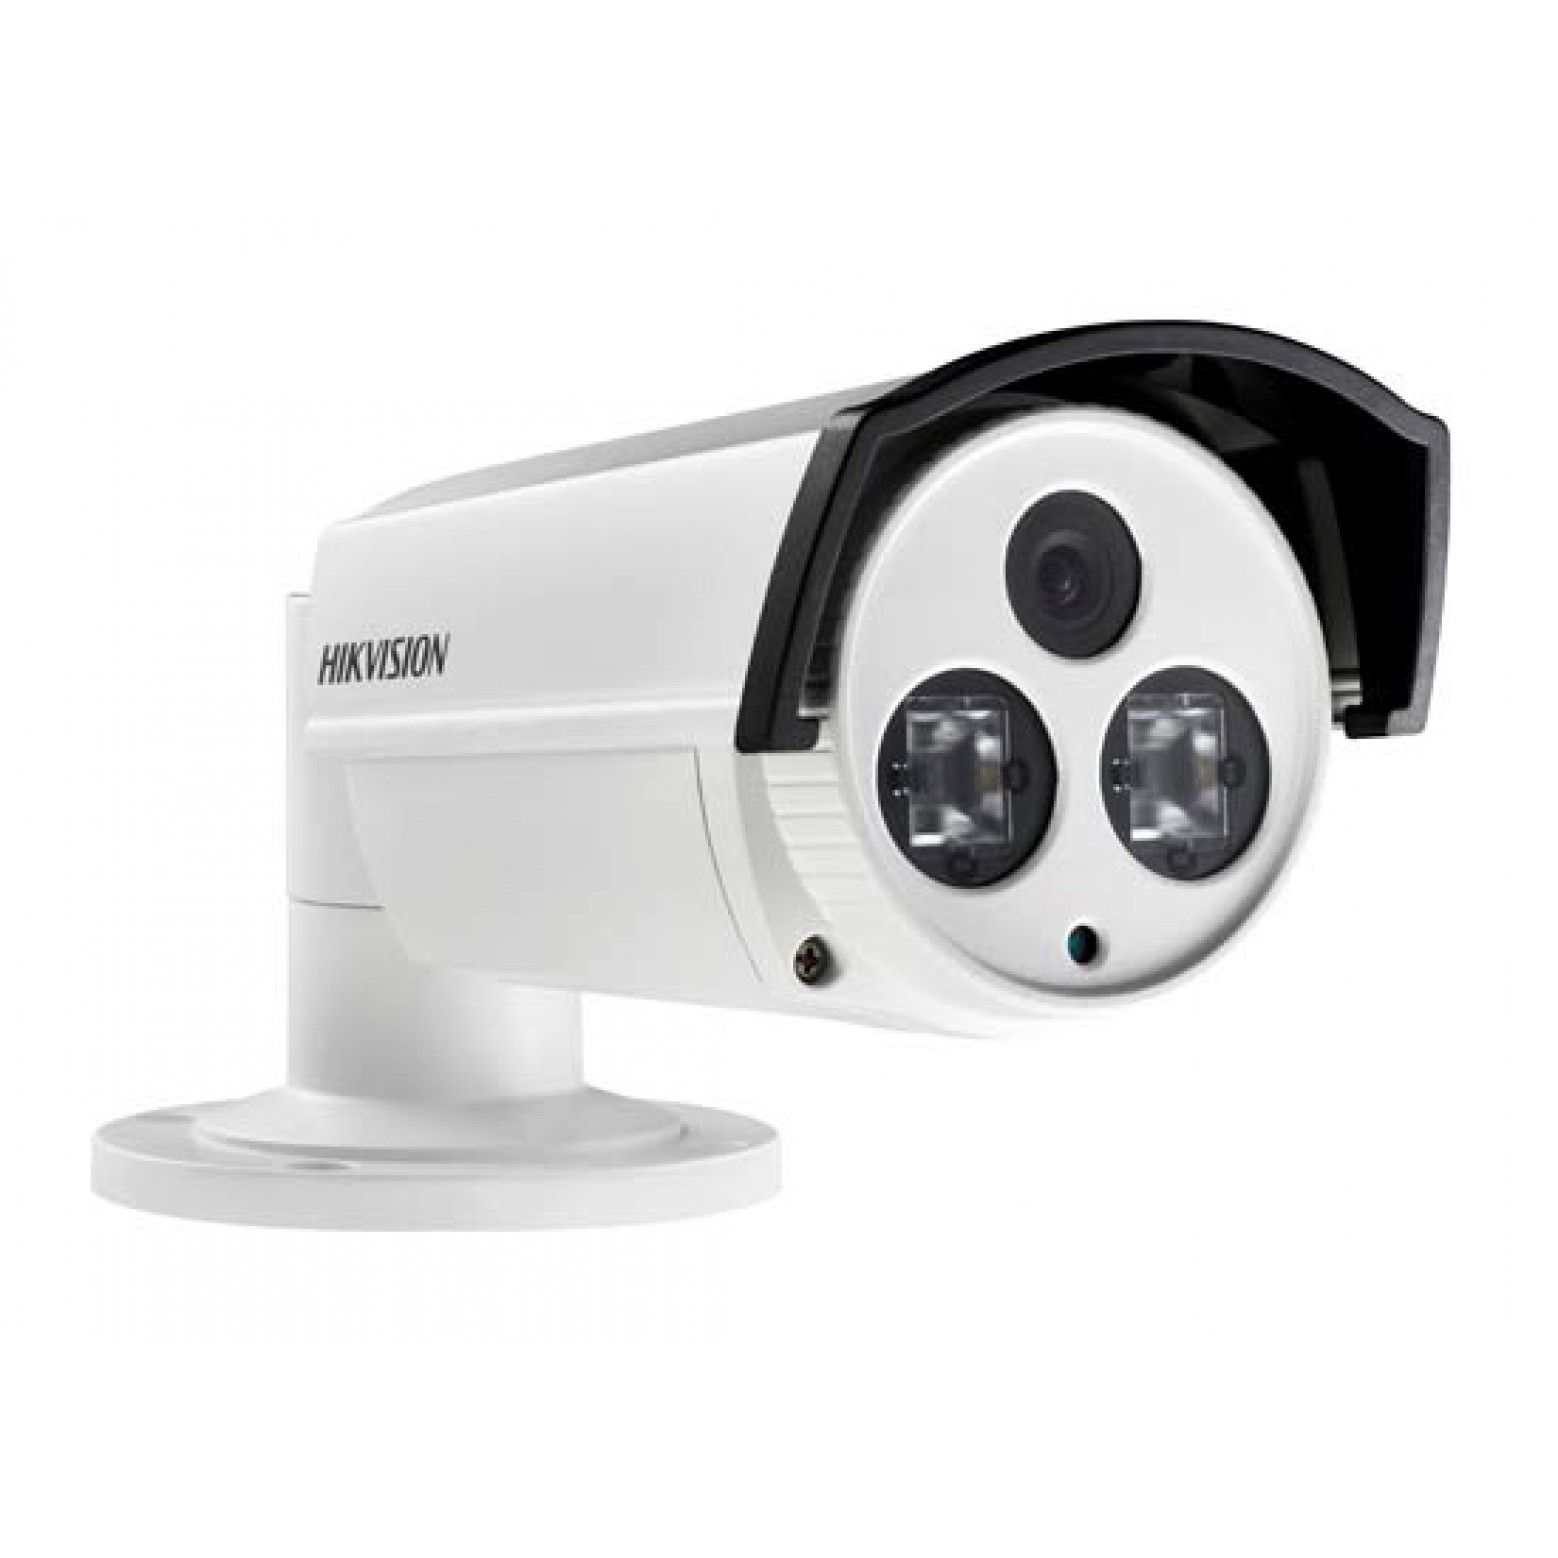 Hikvision DS-2CE16C2T-IT5 6mm Turbo HD Bullet Camera